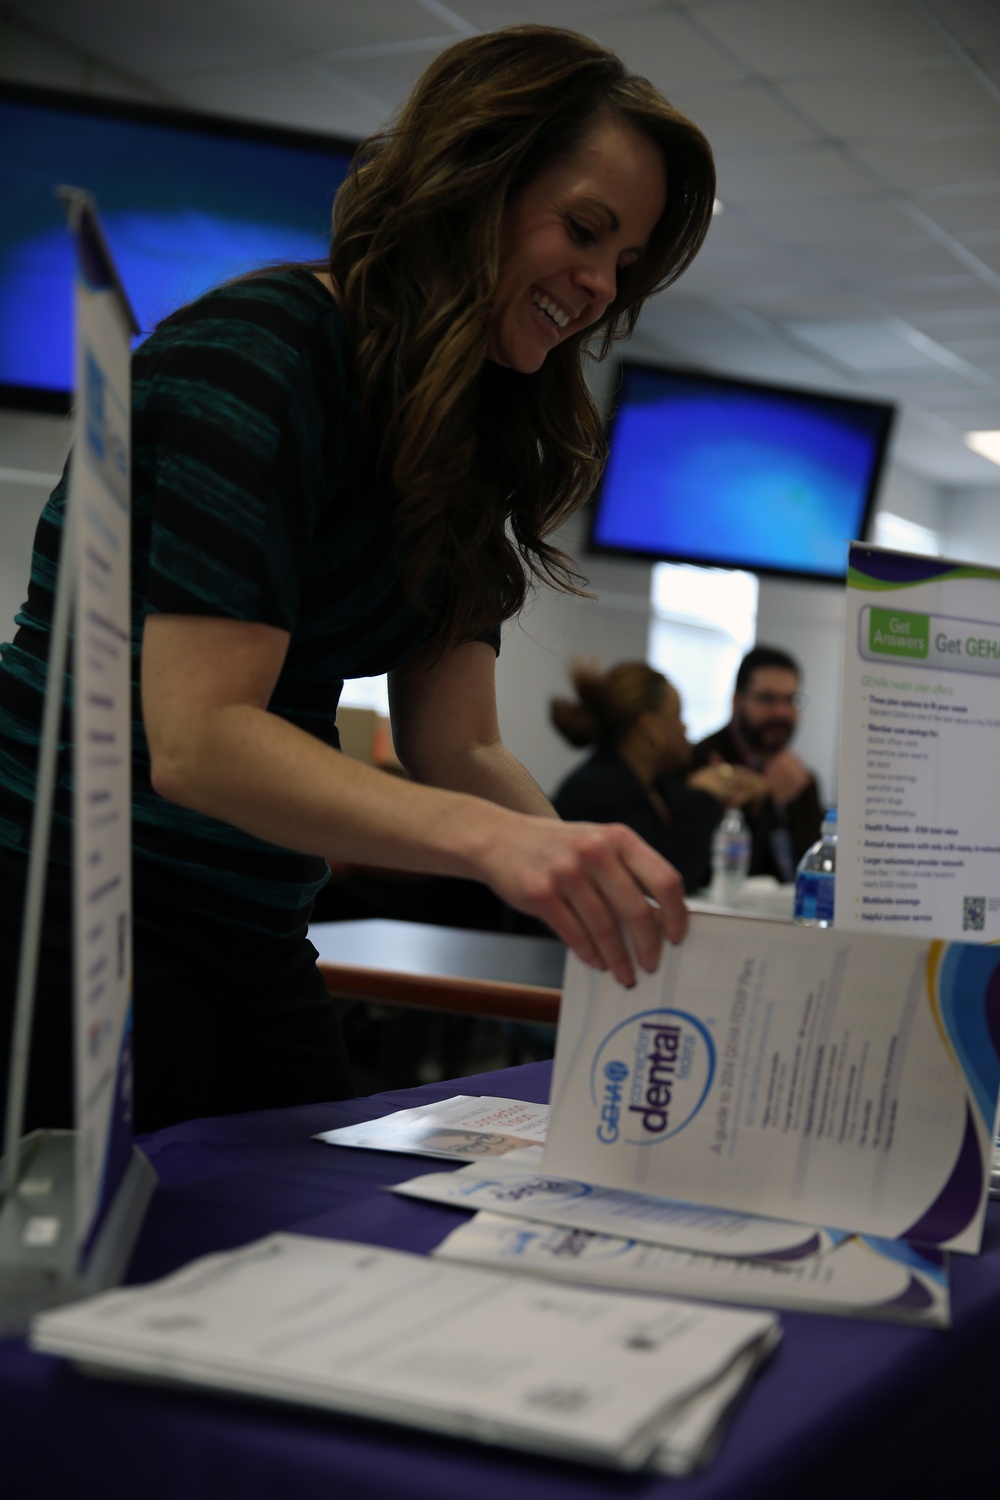 Wellness fair brings health care experts, federal employees together